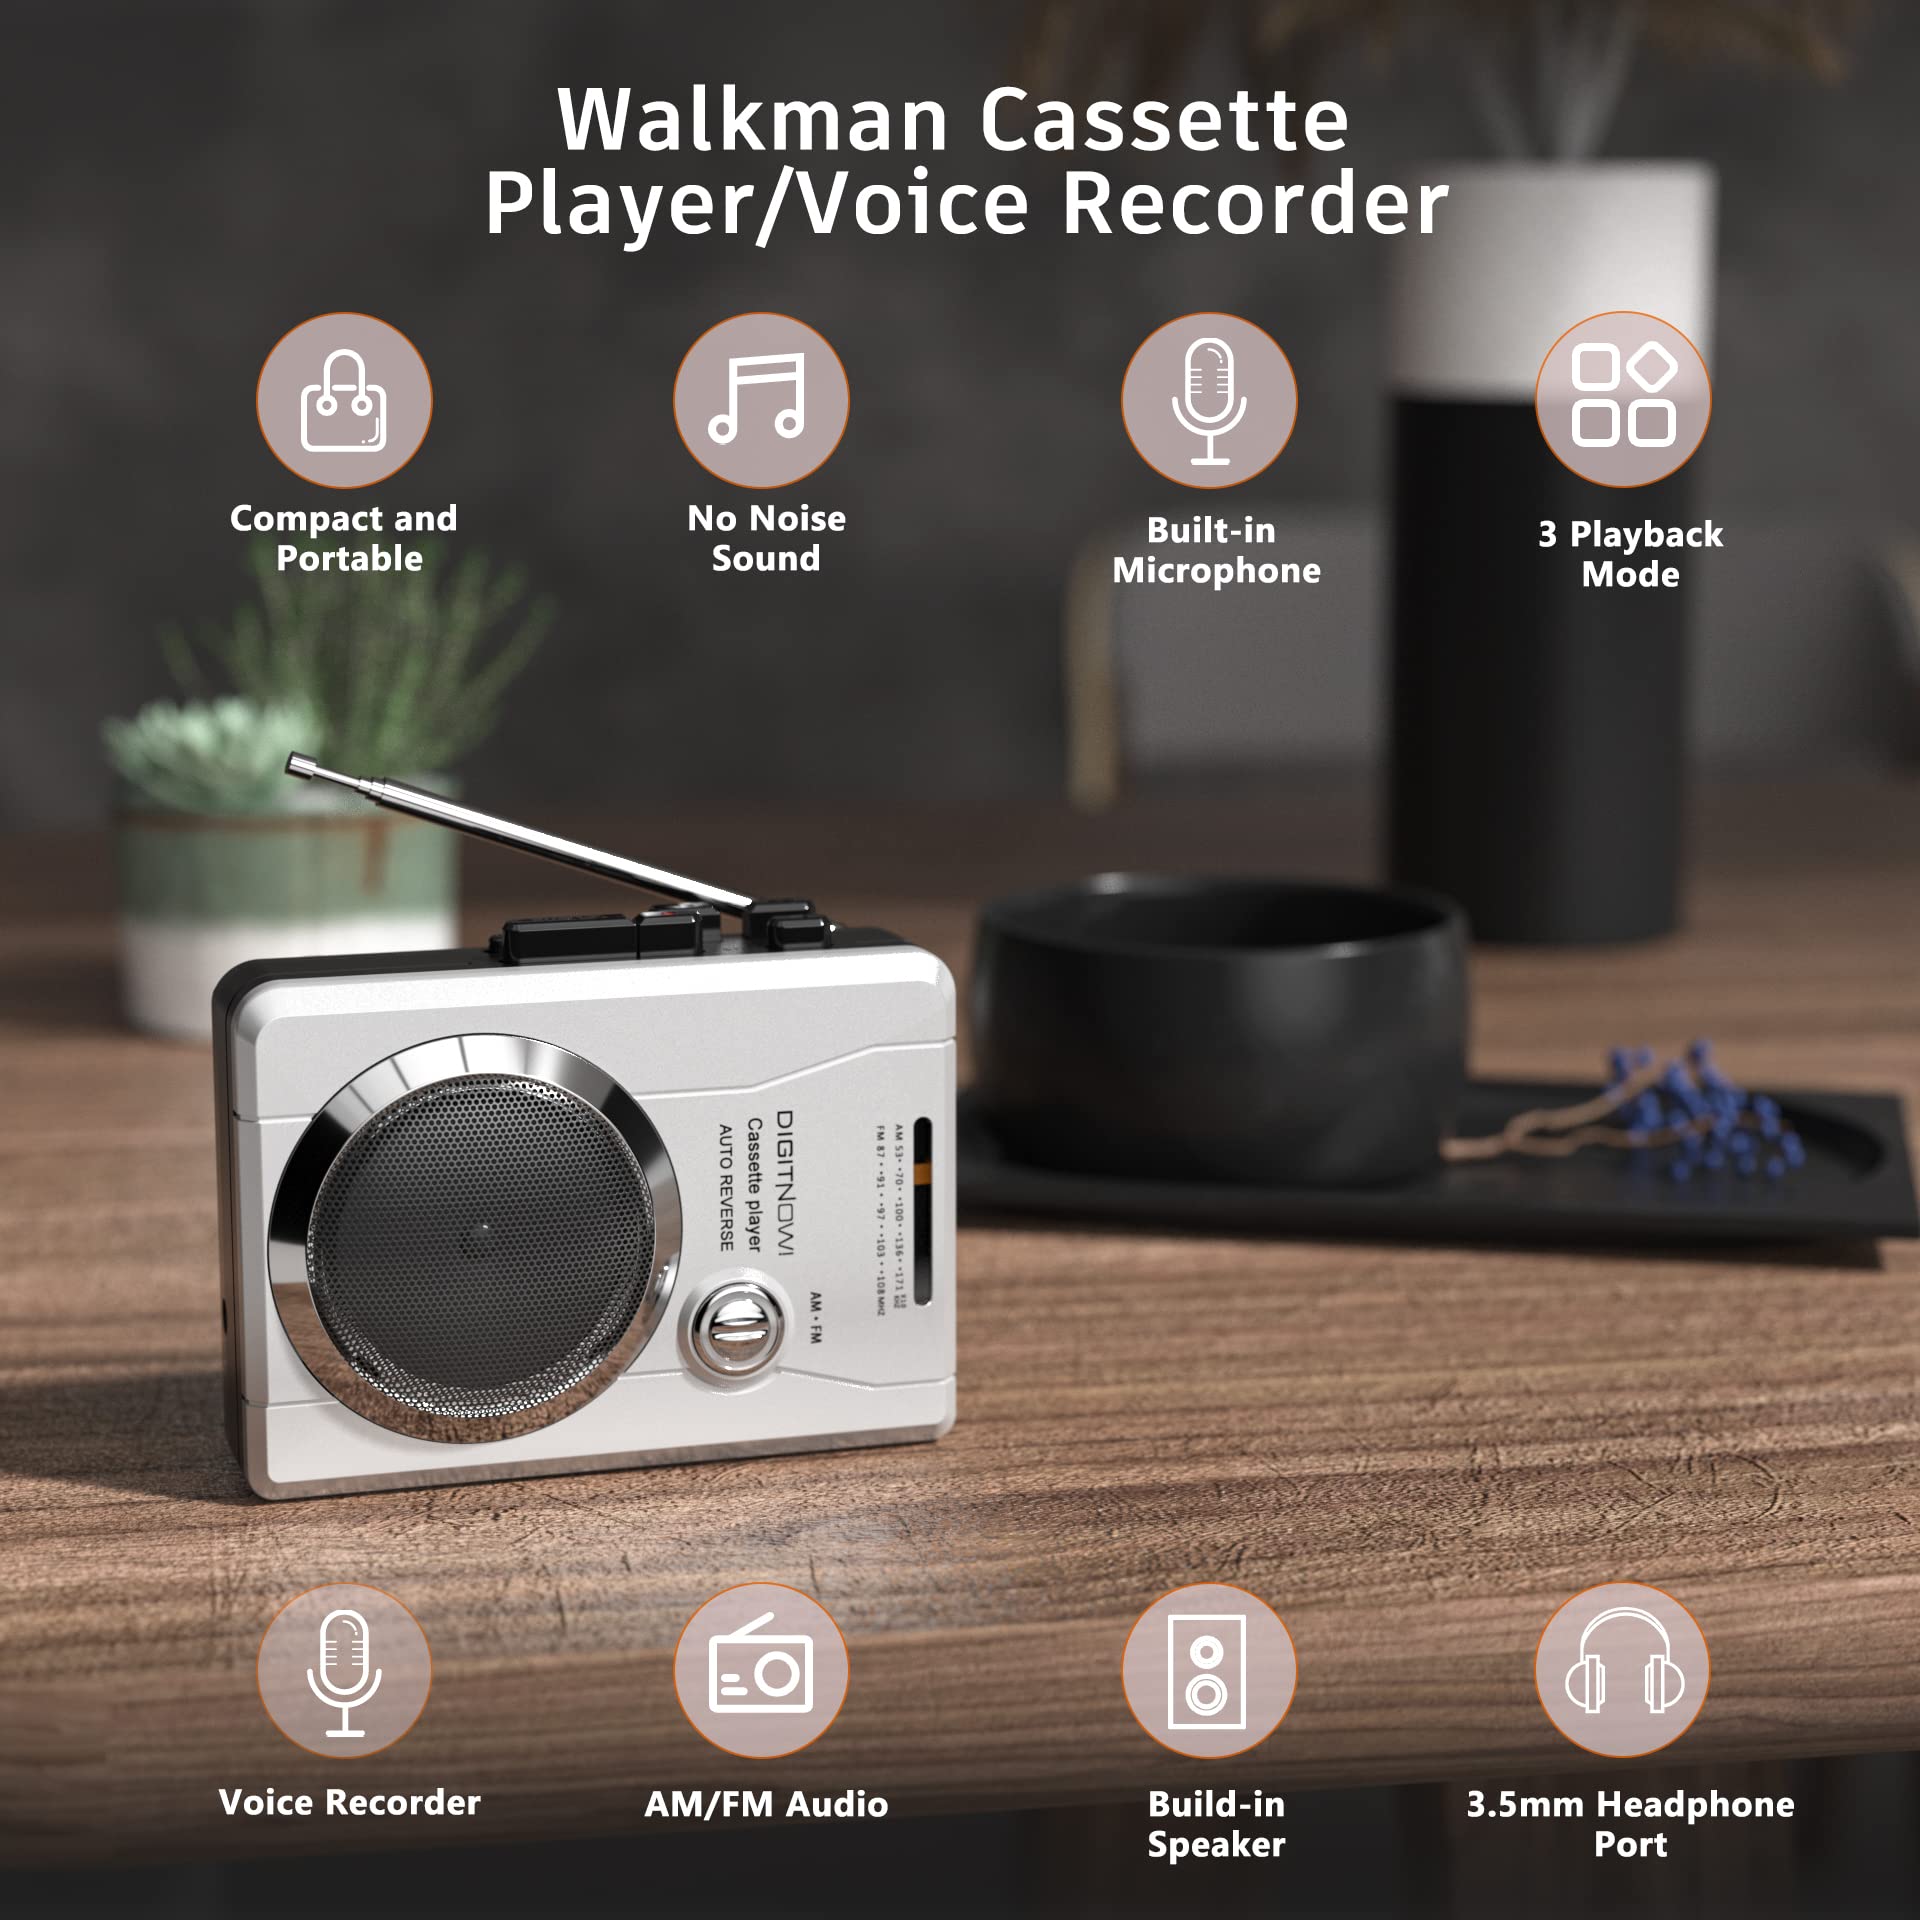 AM/FM Portable Pocket Radio and Voice Audio Cassette Recorder,Personal Audio Walkman Cassette Player with Built-in Speaker and Earphone